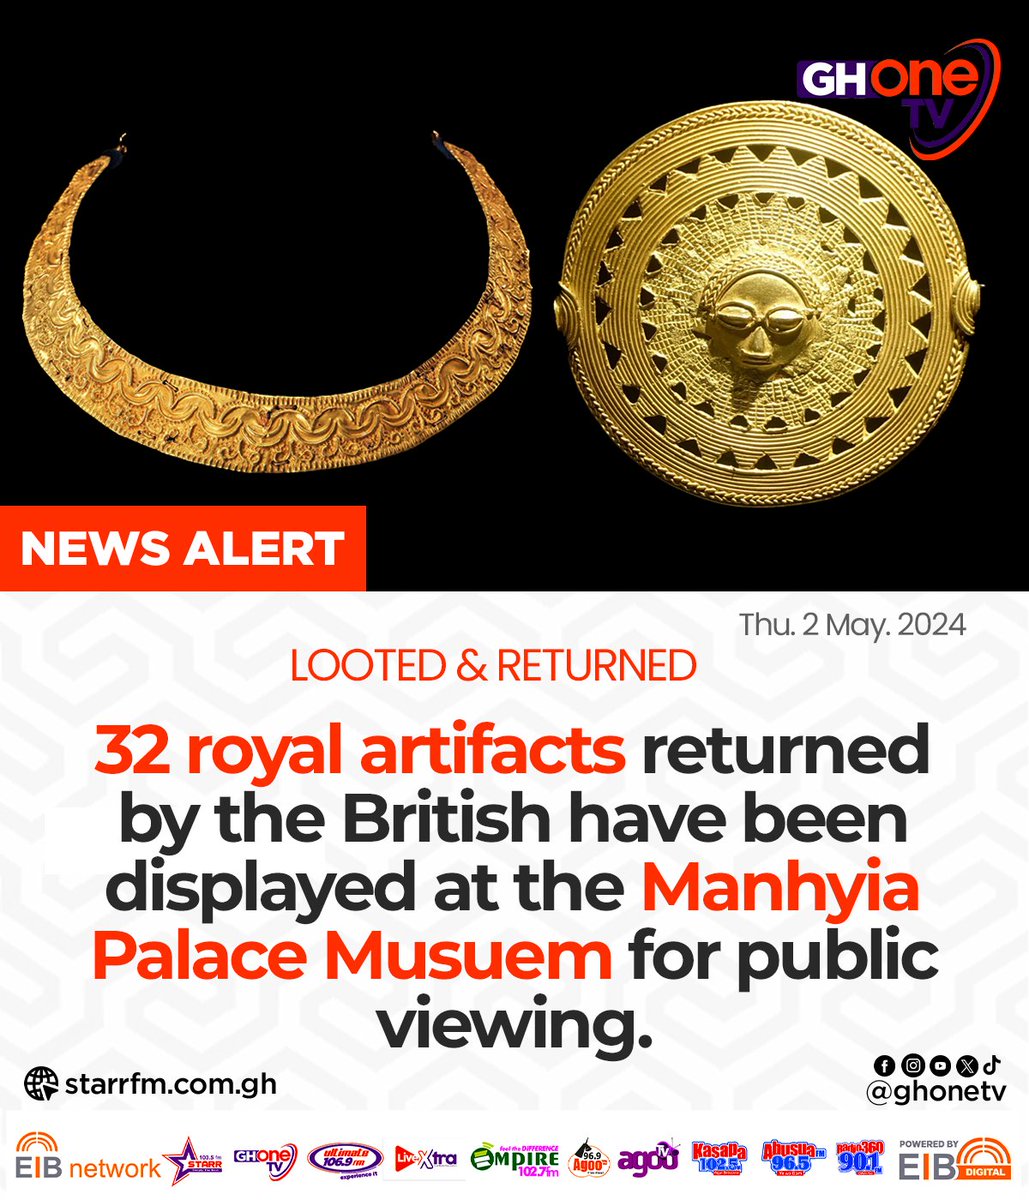 Looted royal artifacts from the Ashanti Kingdom are finally on display for public viewing at the Manhyia Museum in Kumasi, 150 years after the British took them...

#GHOneNews #GHOneTV